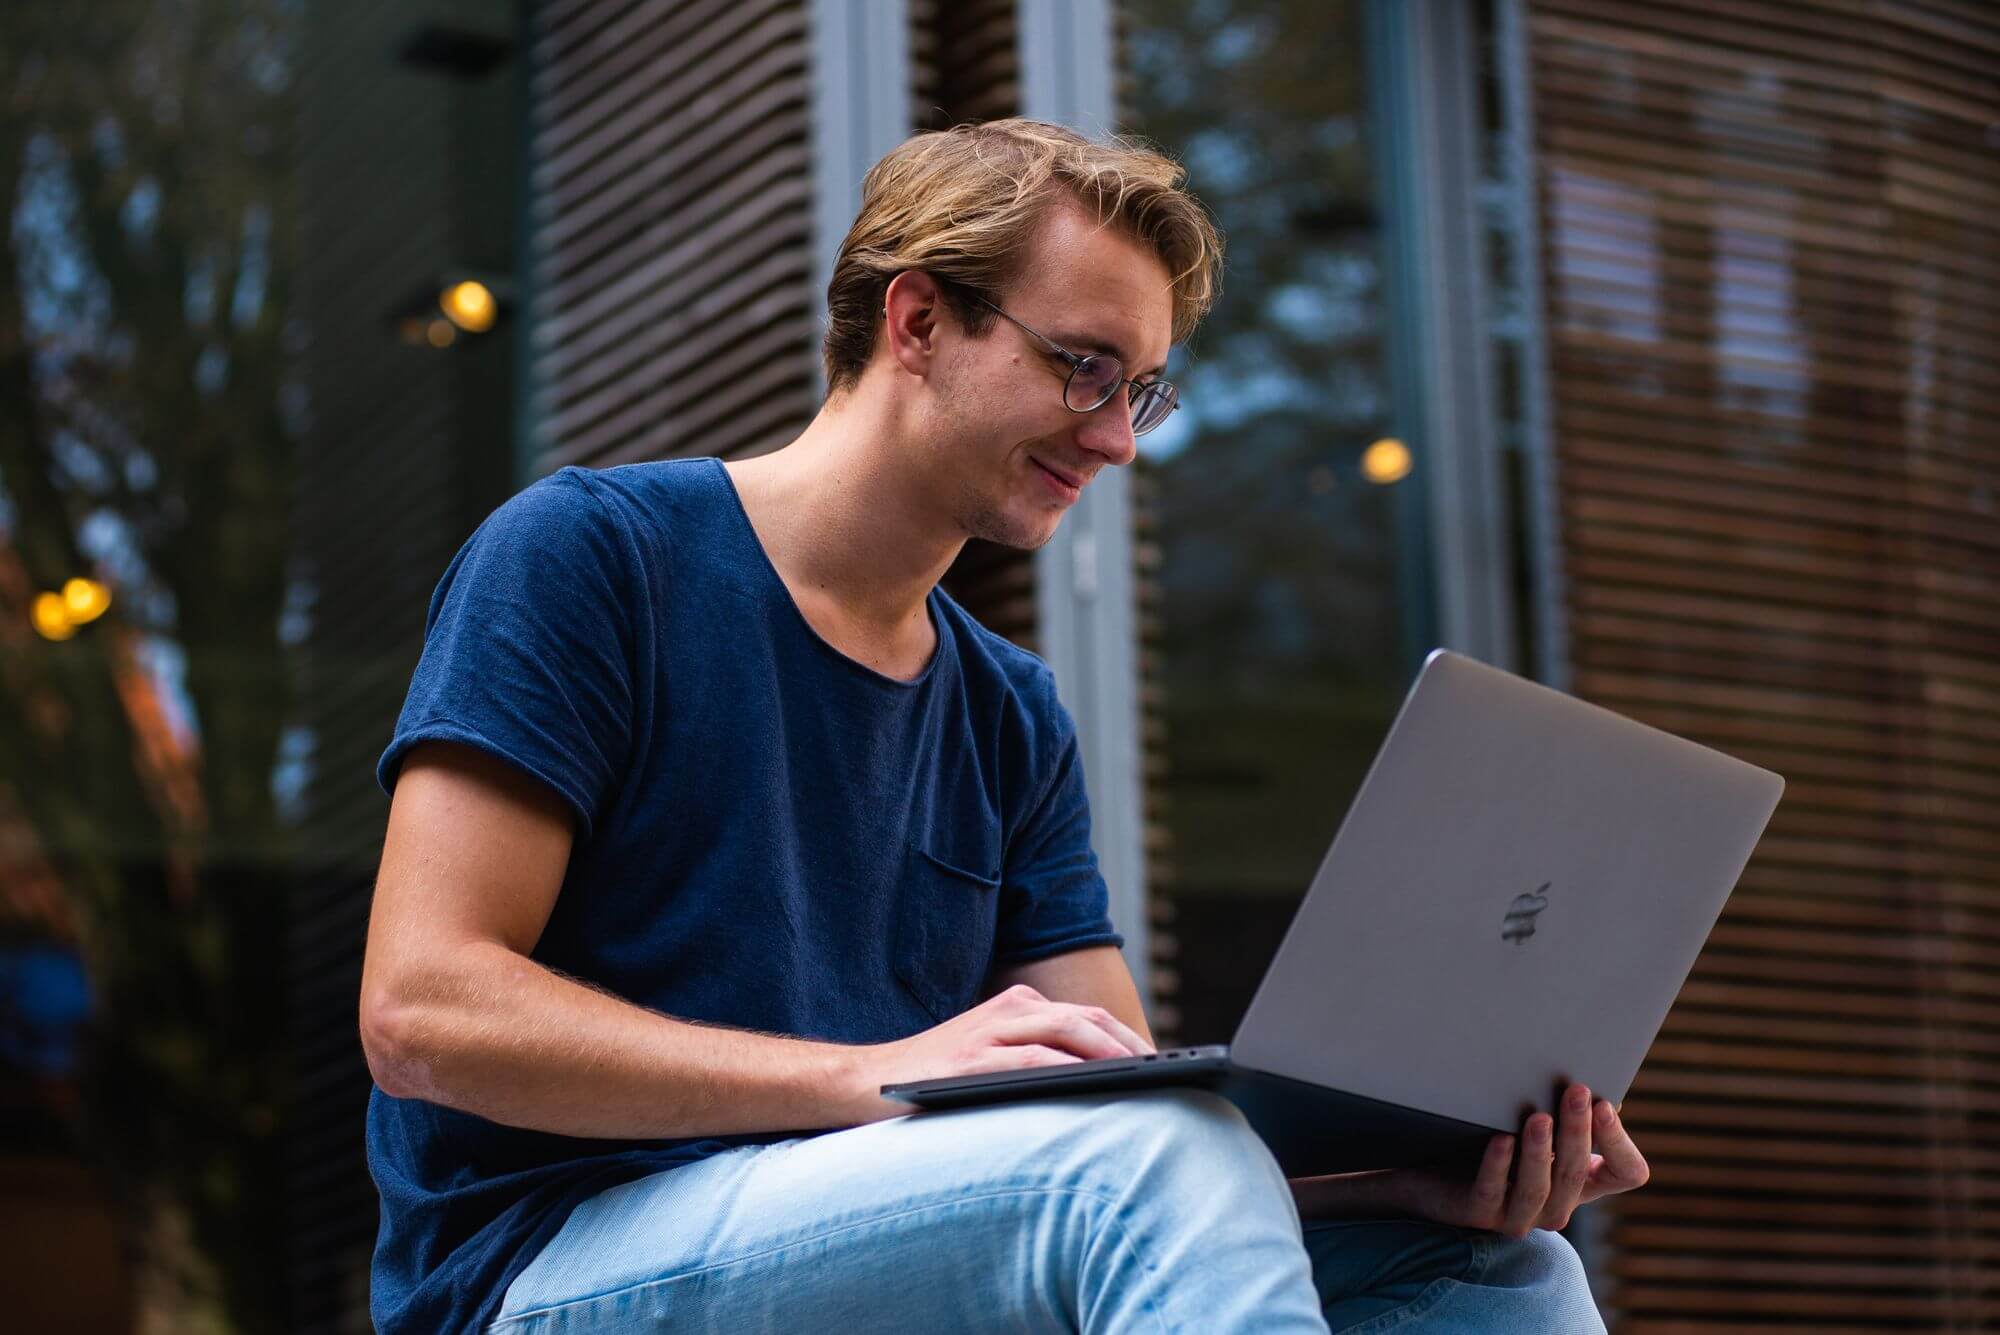 A young man with glasses looks at his laptop outside.